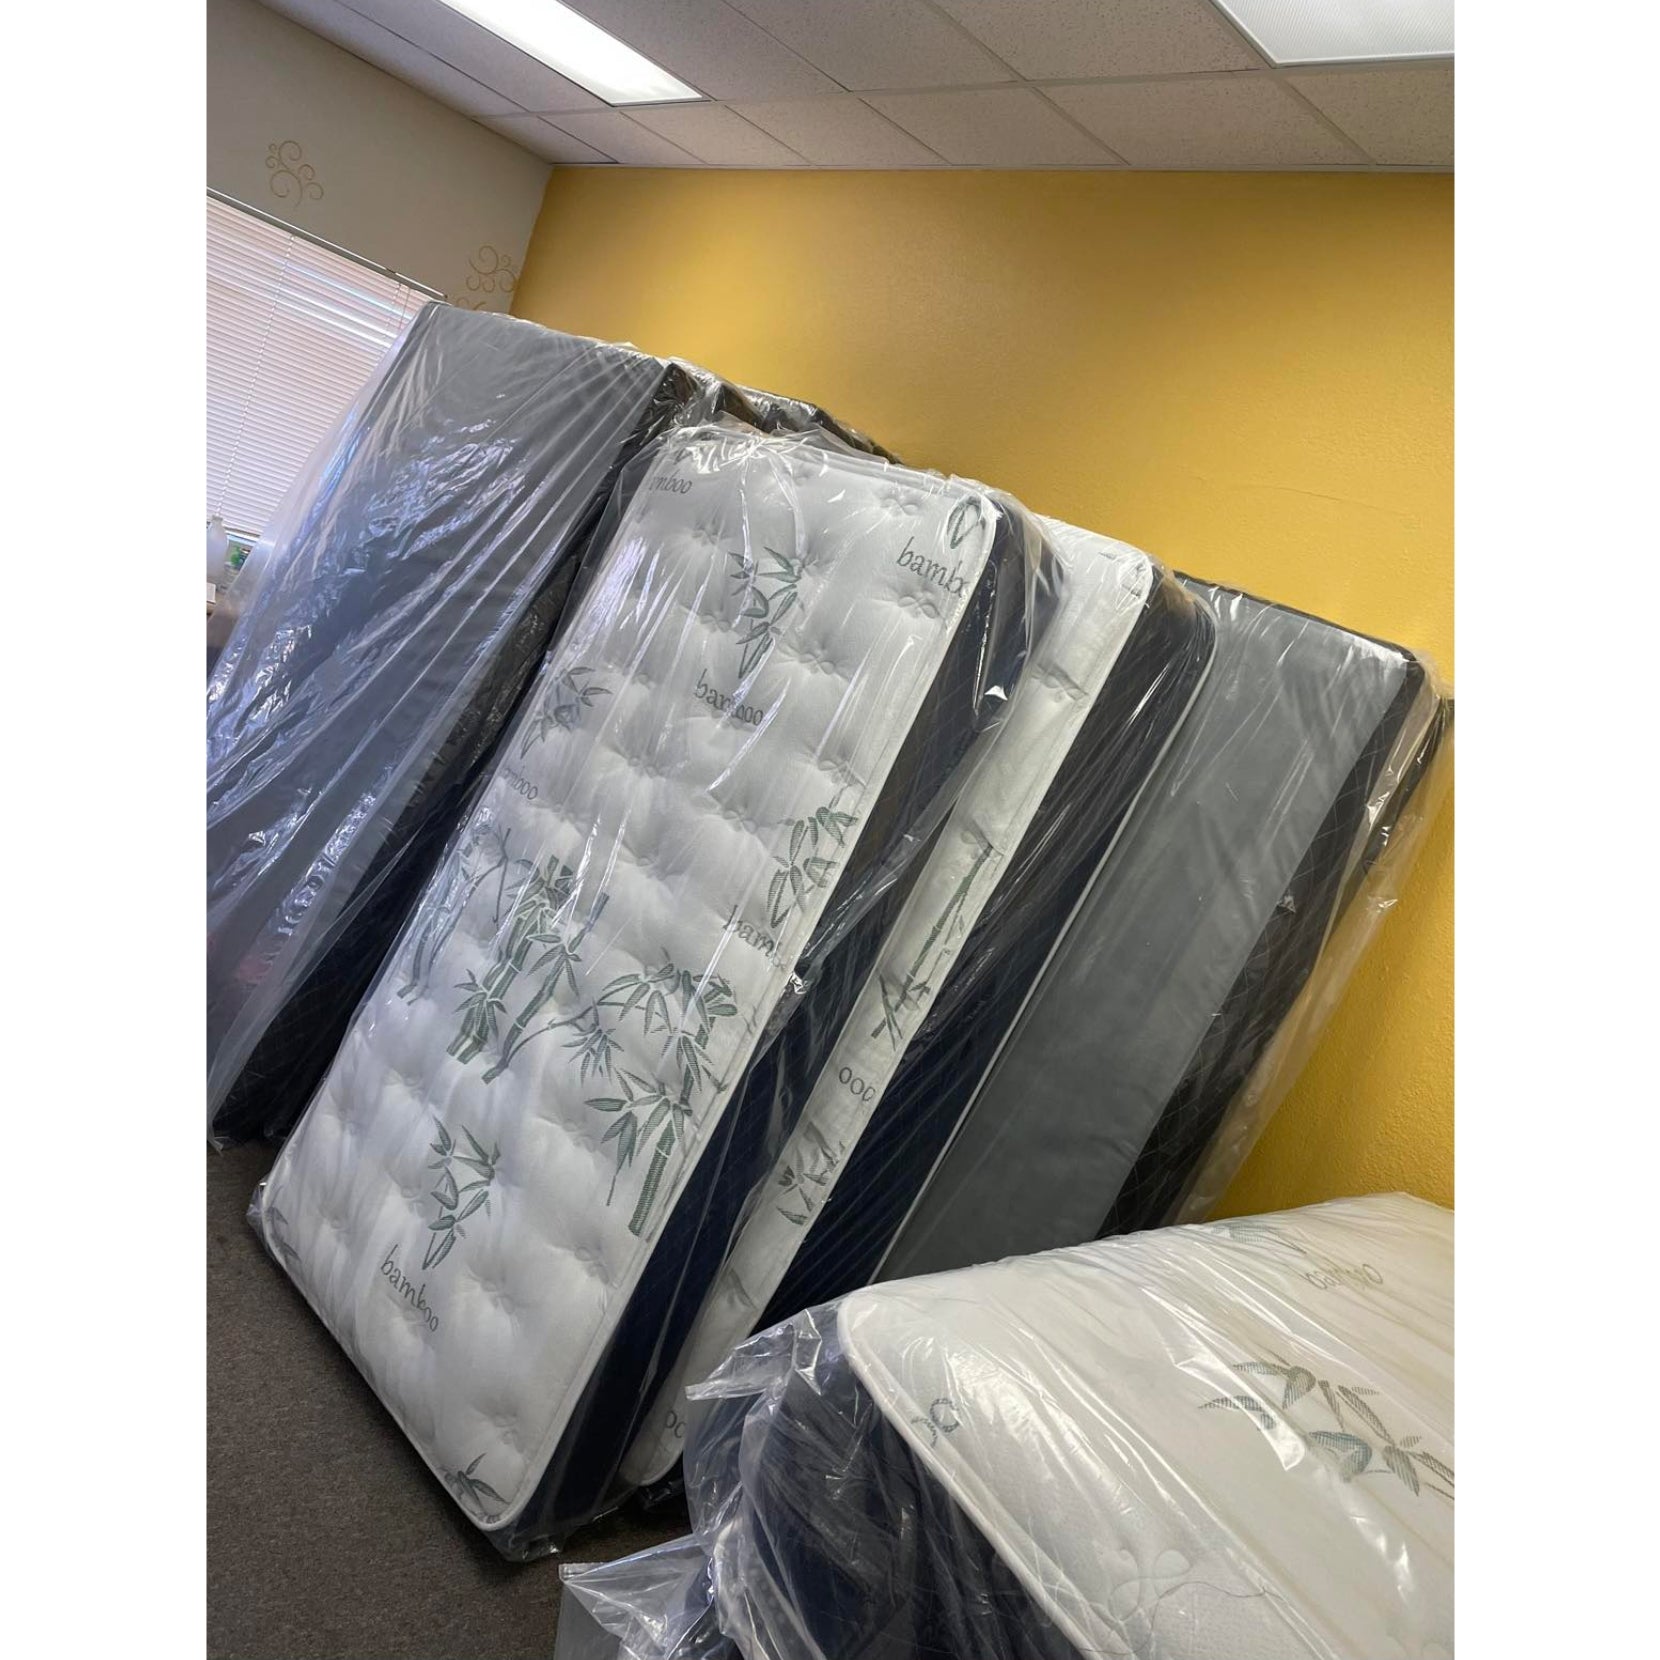 Vivians 8.5" Innerspring Mattress With White Bamboo Quilt, Inside Of A Showroom, Stacked Upright Against Other Mattresses